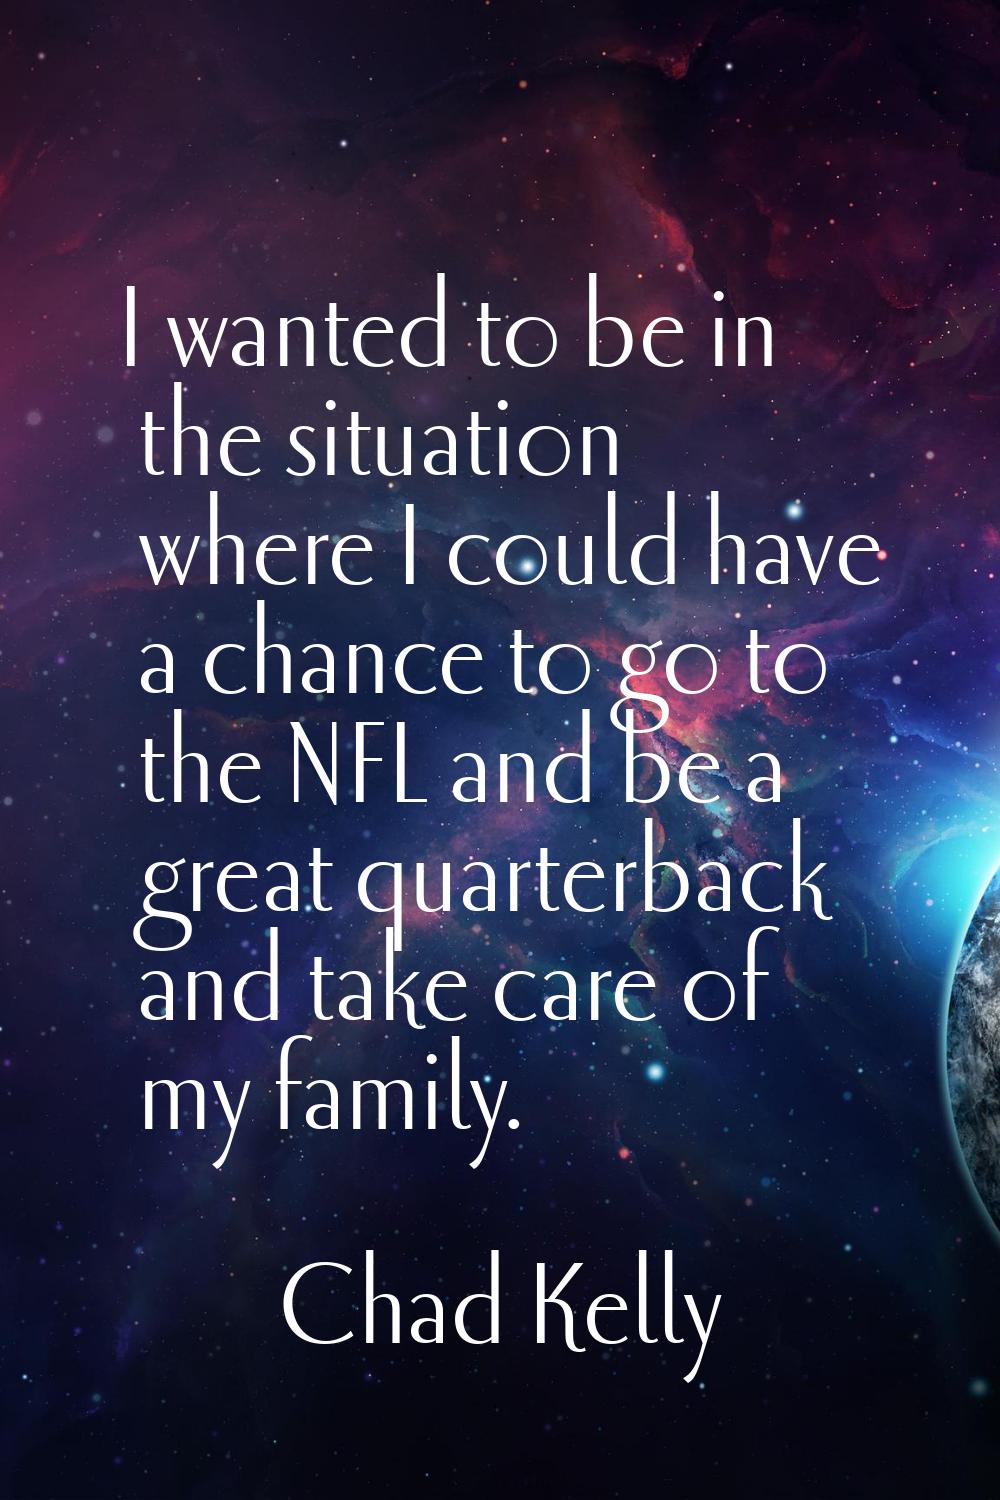 I wanted to be in the situation where I could have a chance to go to the NFL and be a great quarter